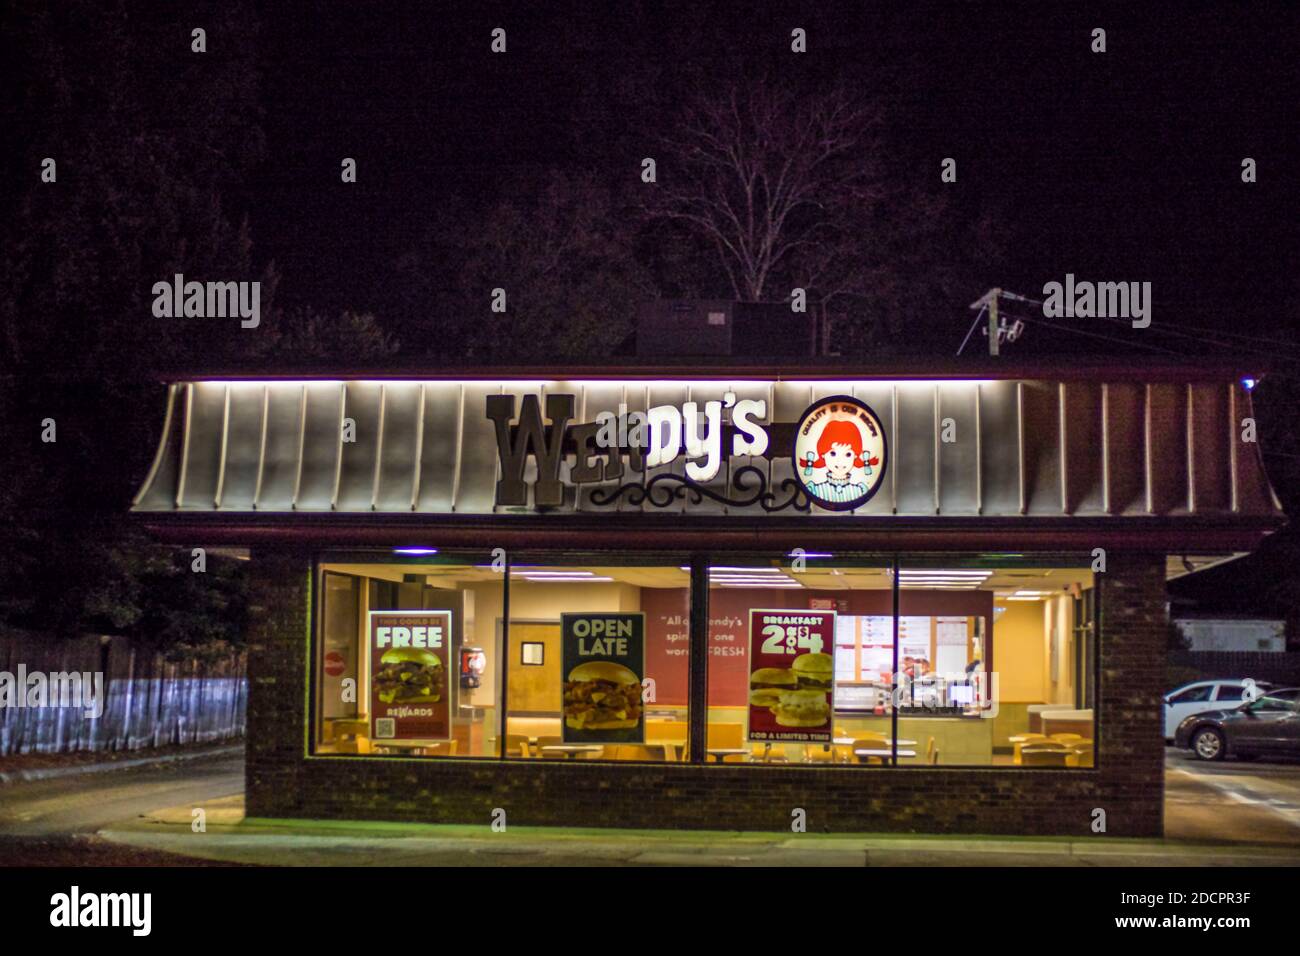 Augusta, Ga / USA - 11 20 20: Wendys Restaurant front building view at night Stock Photo